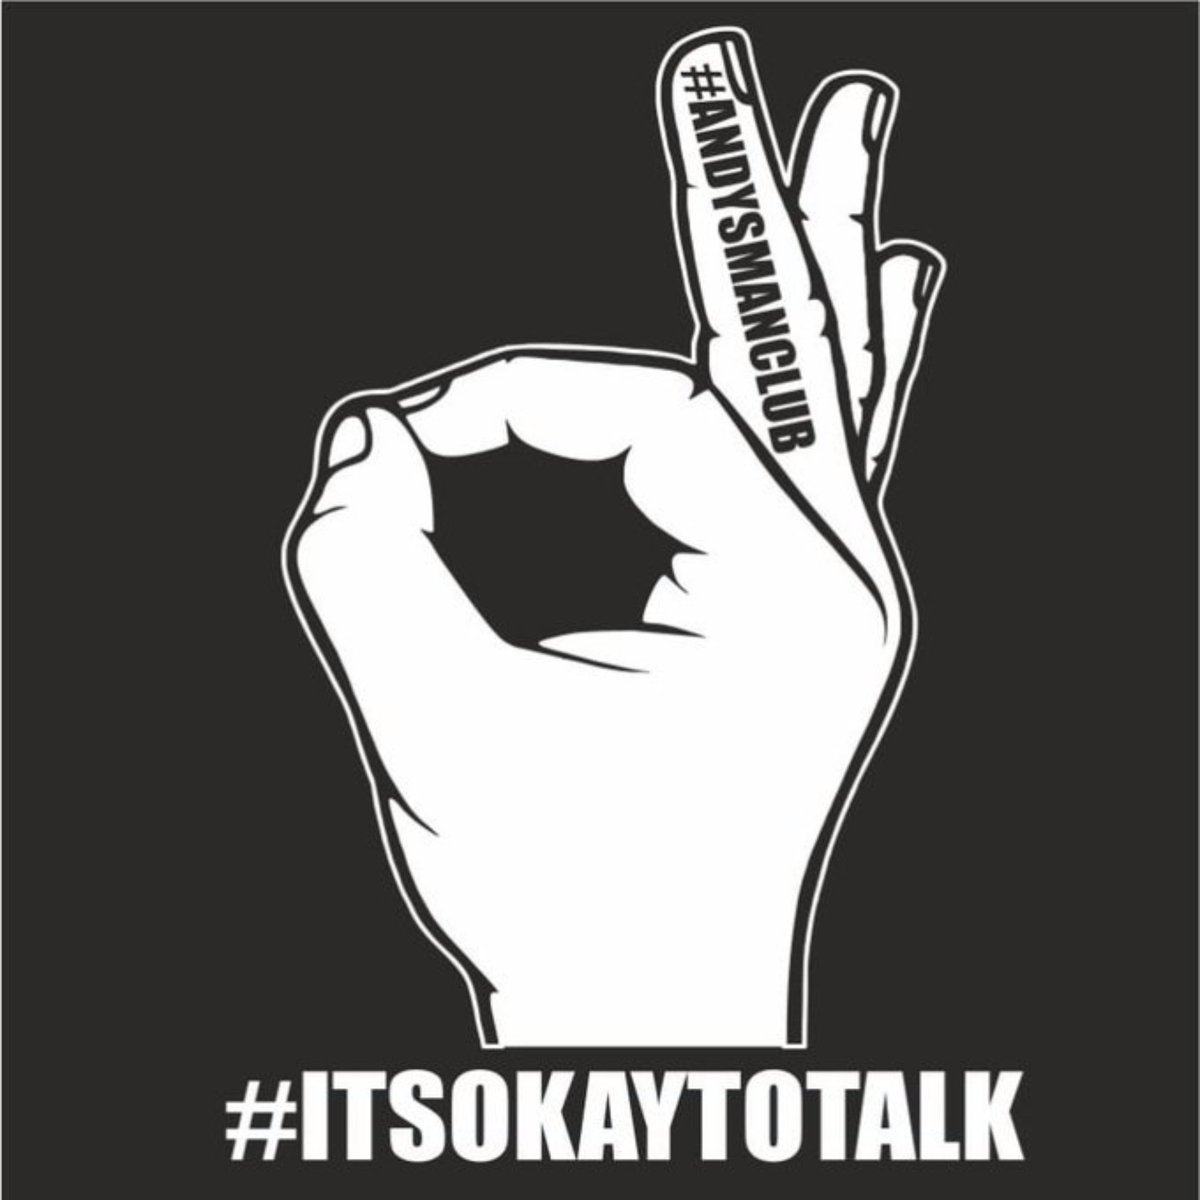 No meeting this Monday but the following week at the @JDavidsonScrap Stadium - and every Monday (excluding Bank Holidays) - from 7pm 👌 @andysmanclubuk | #ItsOkayToTalk